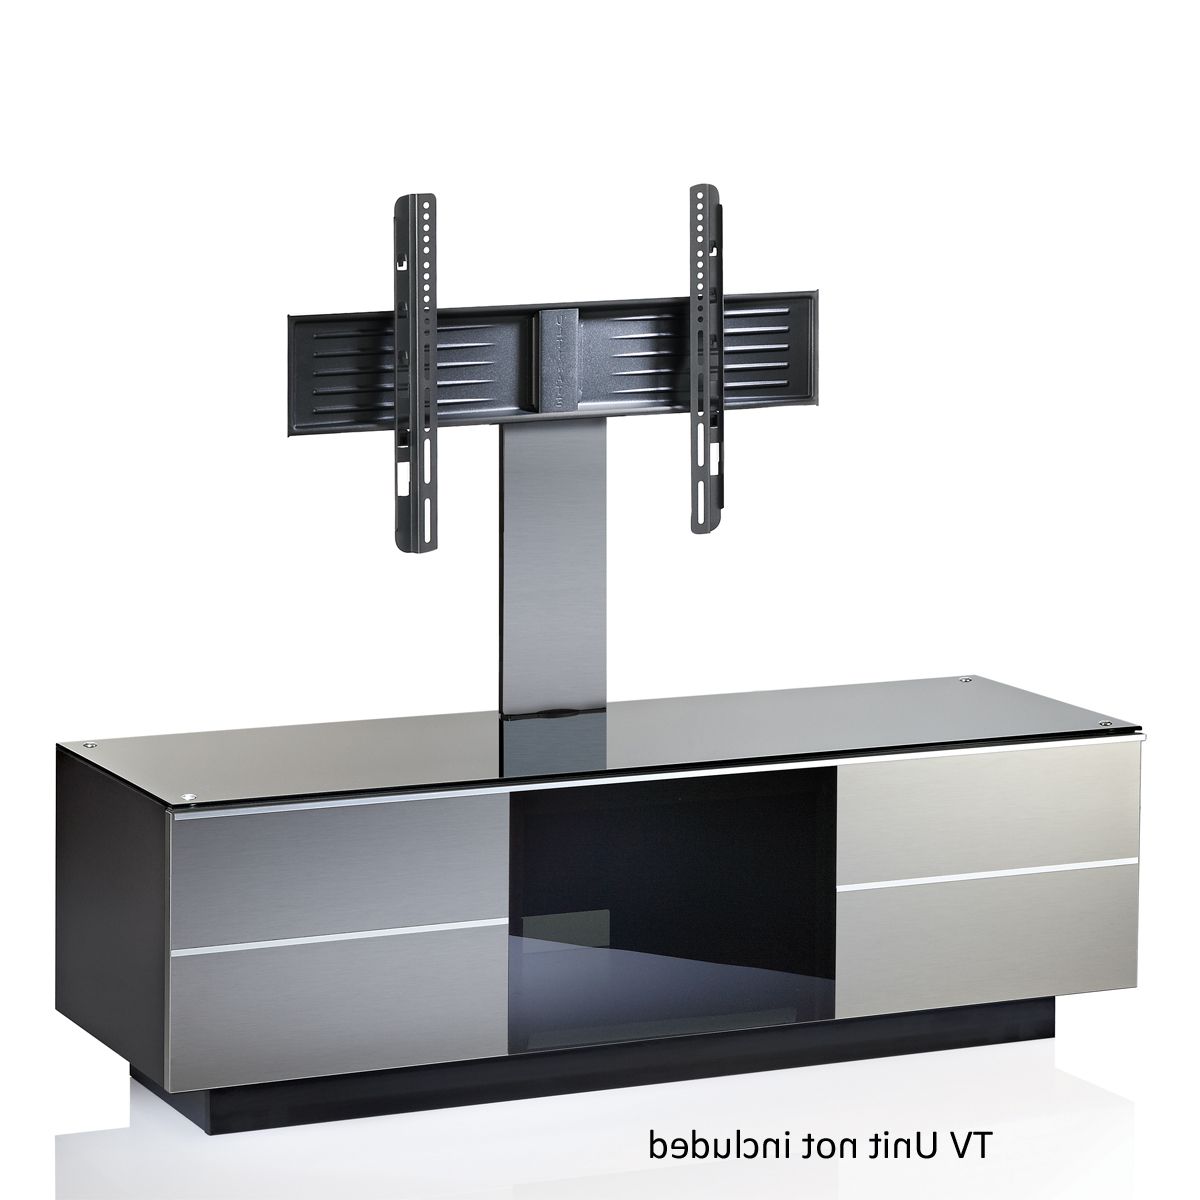 Current Inox G B 80 Inx Cantilever Tv Bracket,ukcf Ultimate,,uk Cf Ultimate Regarding Cheap Cantilever Tv Stands (View 19 of 20)